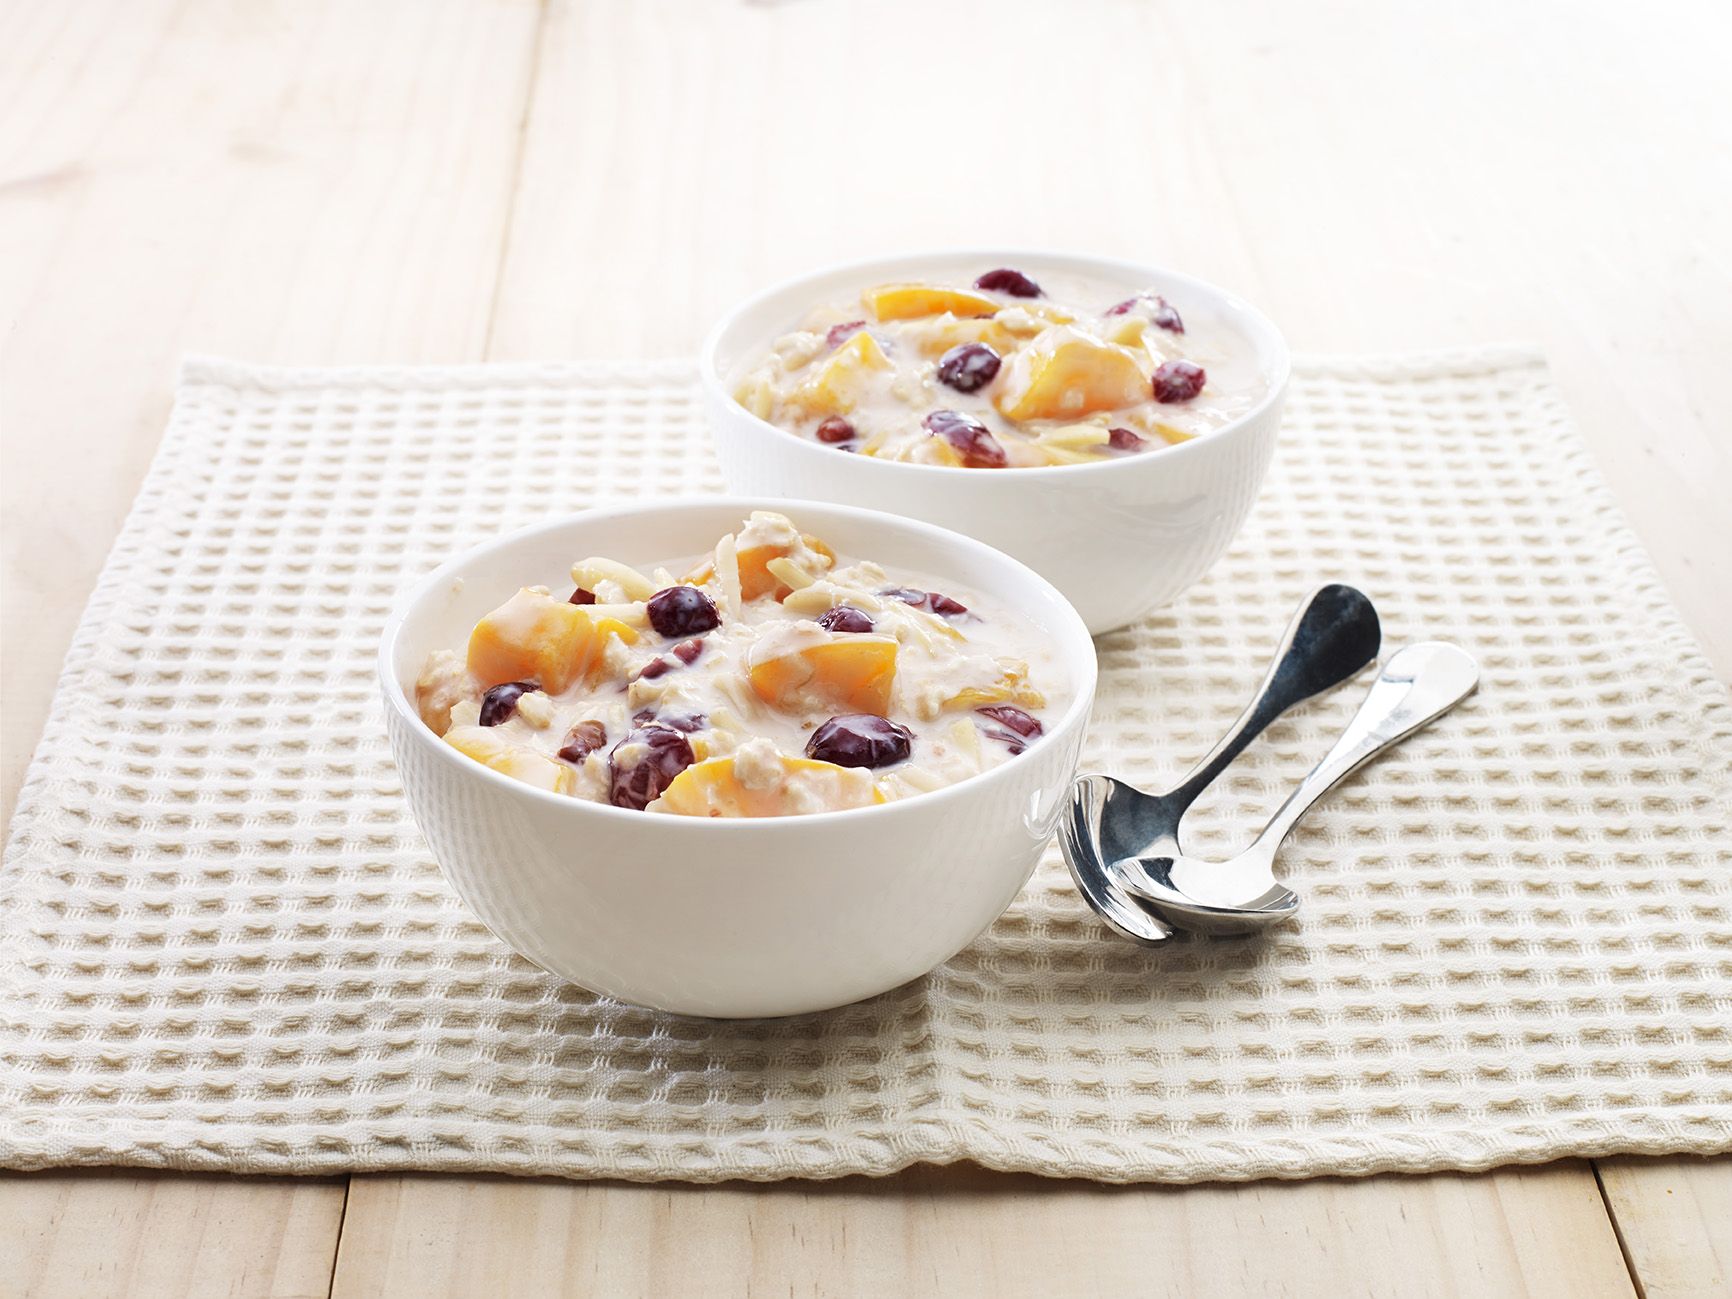 Two white ceramic bowls containing a wet mixture of oats, peach slices and cranberries.